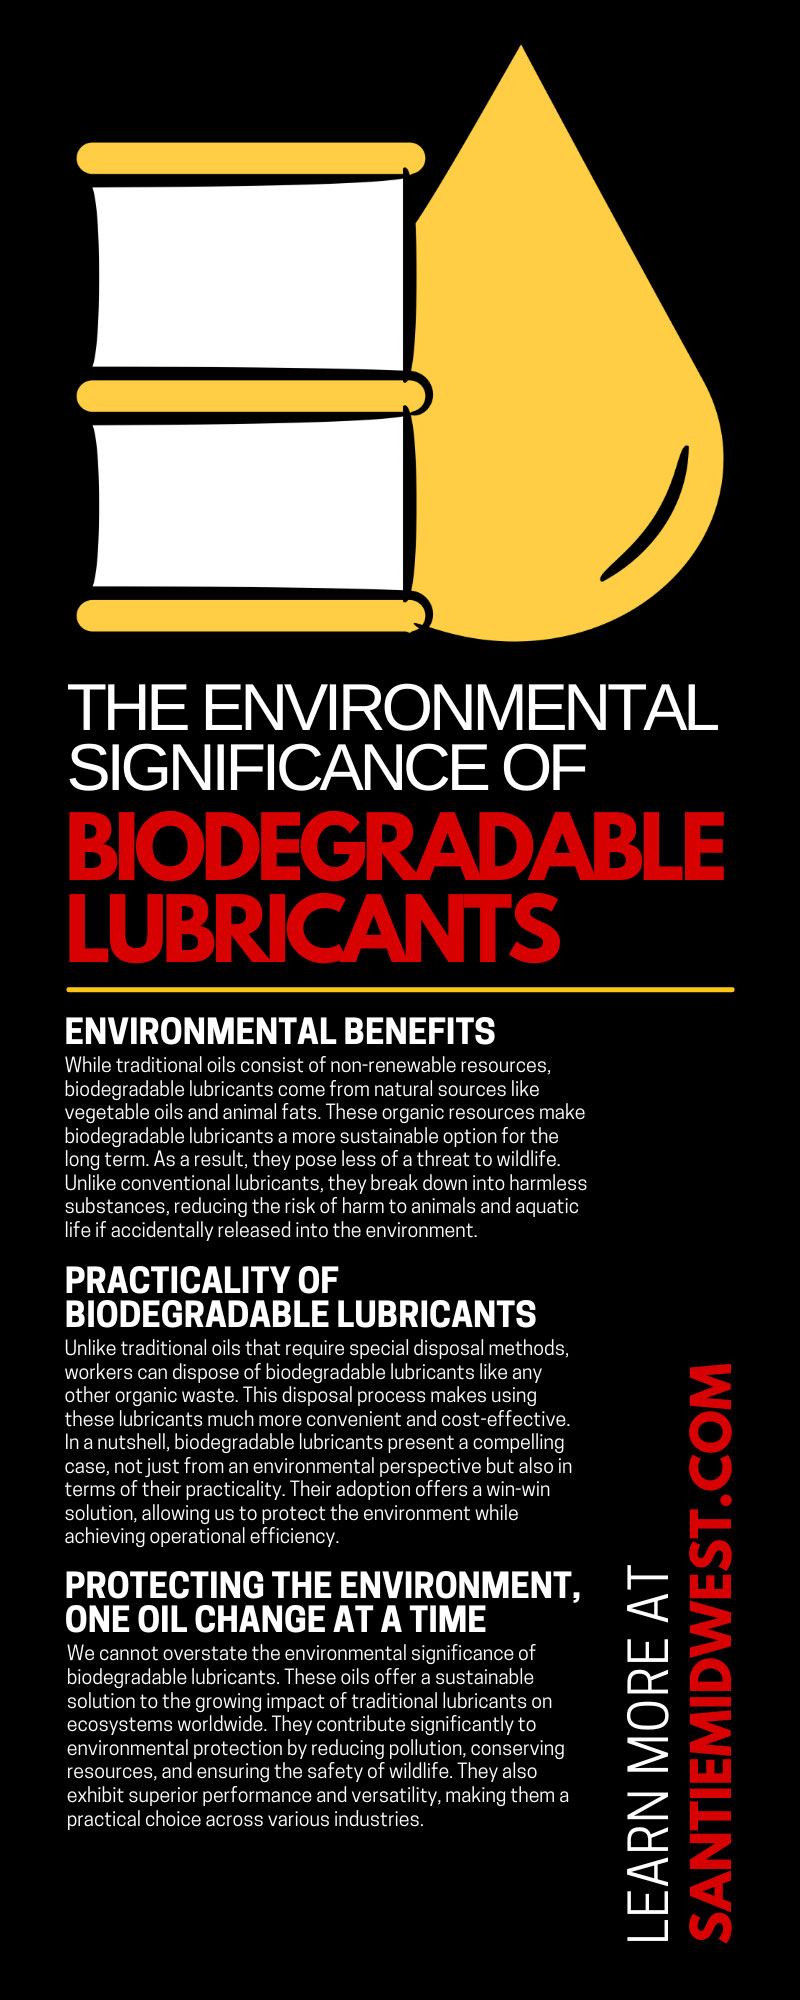 The Environmental Significance of Biodegradable Lubricants